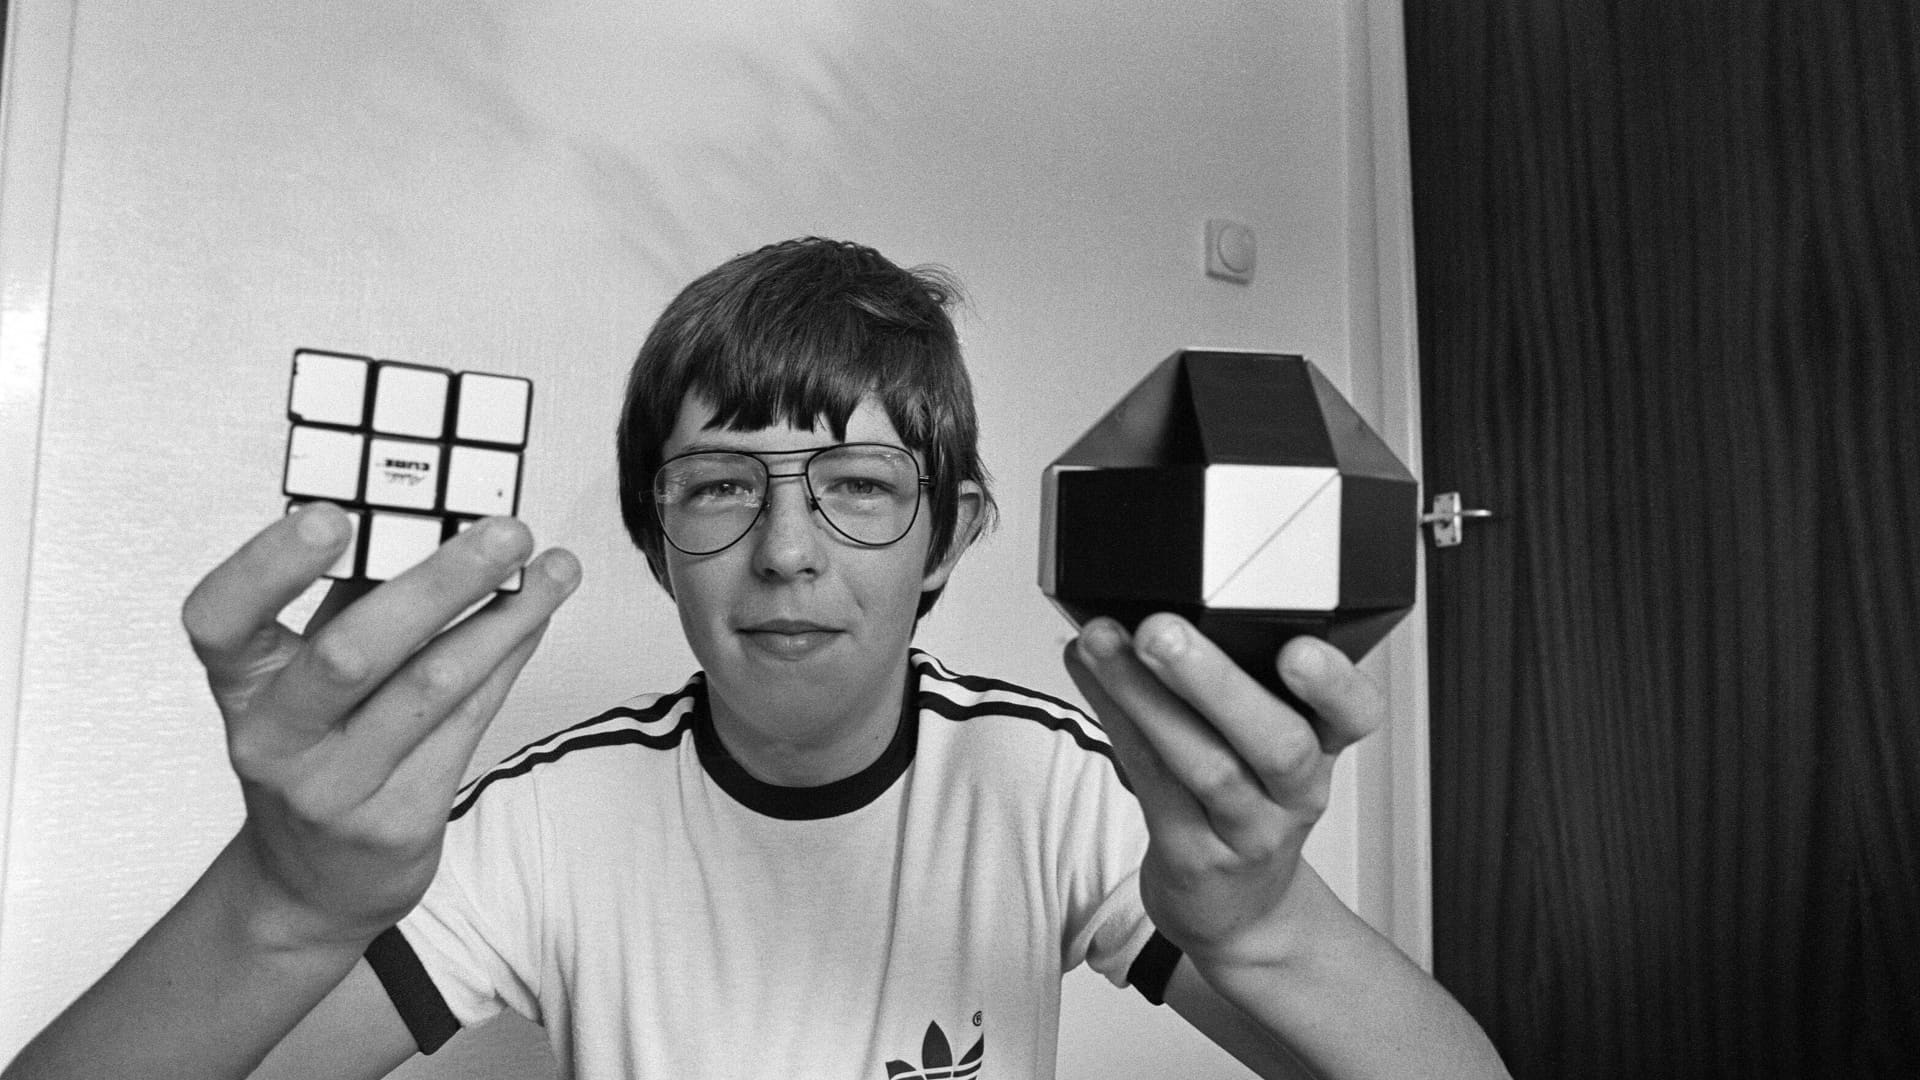 14-year-old Terence Wilson of Deepdale near Preston, with his Rubik's Cube and Rubik's Snake, 28th August 1981.